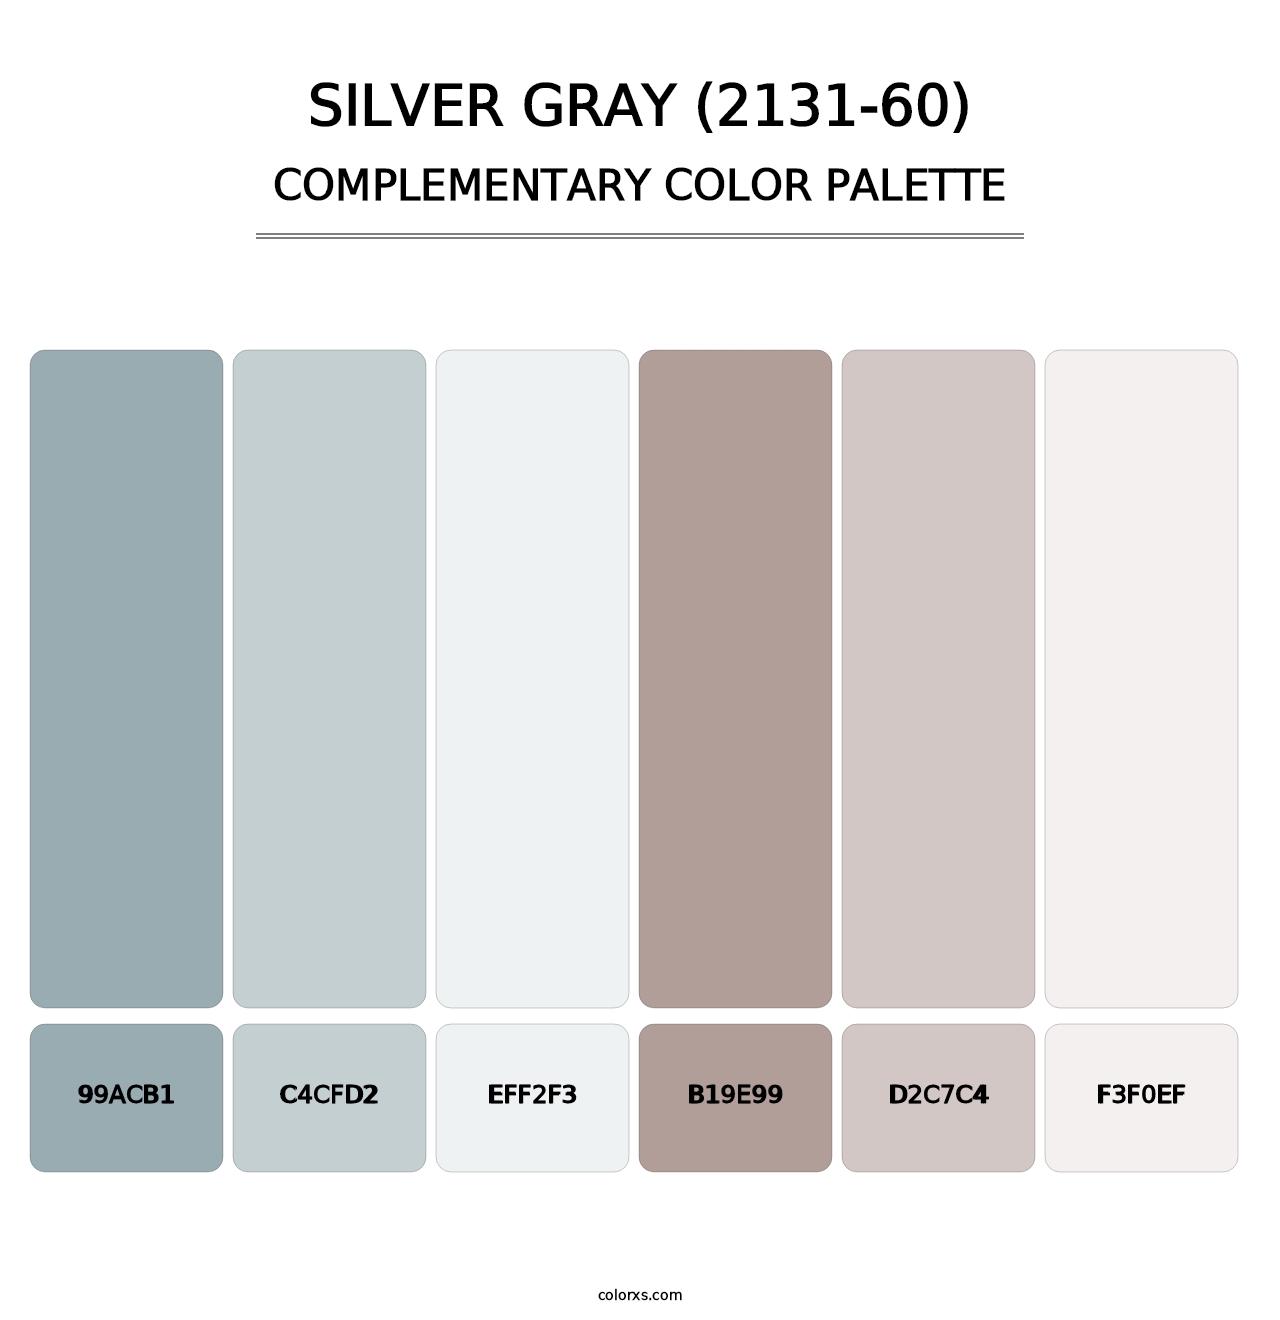 Silver Gray (2131-60) - Complementary Color Palette